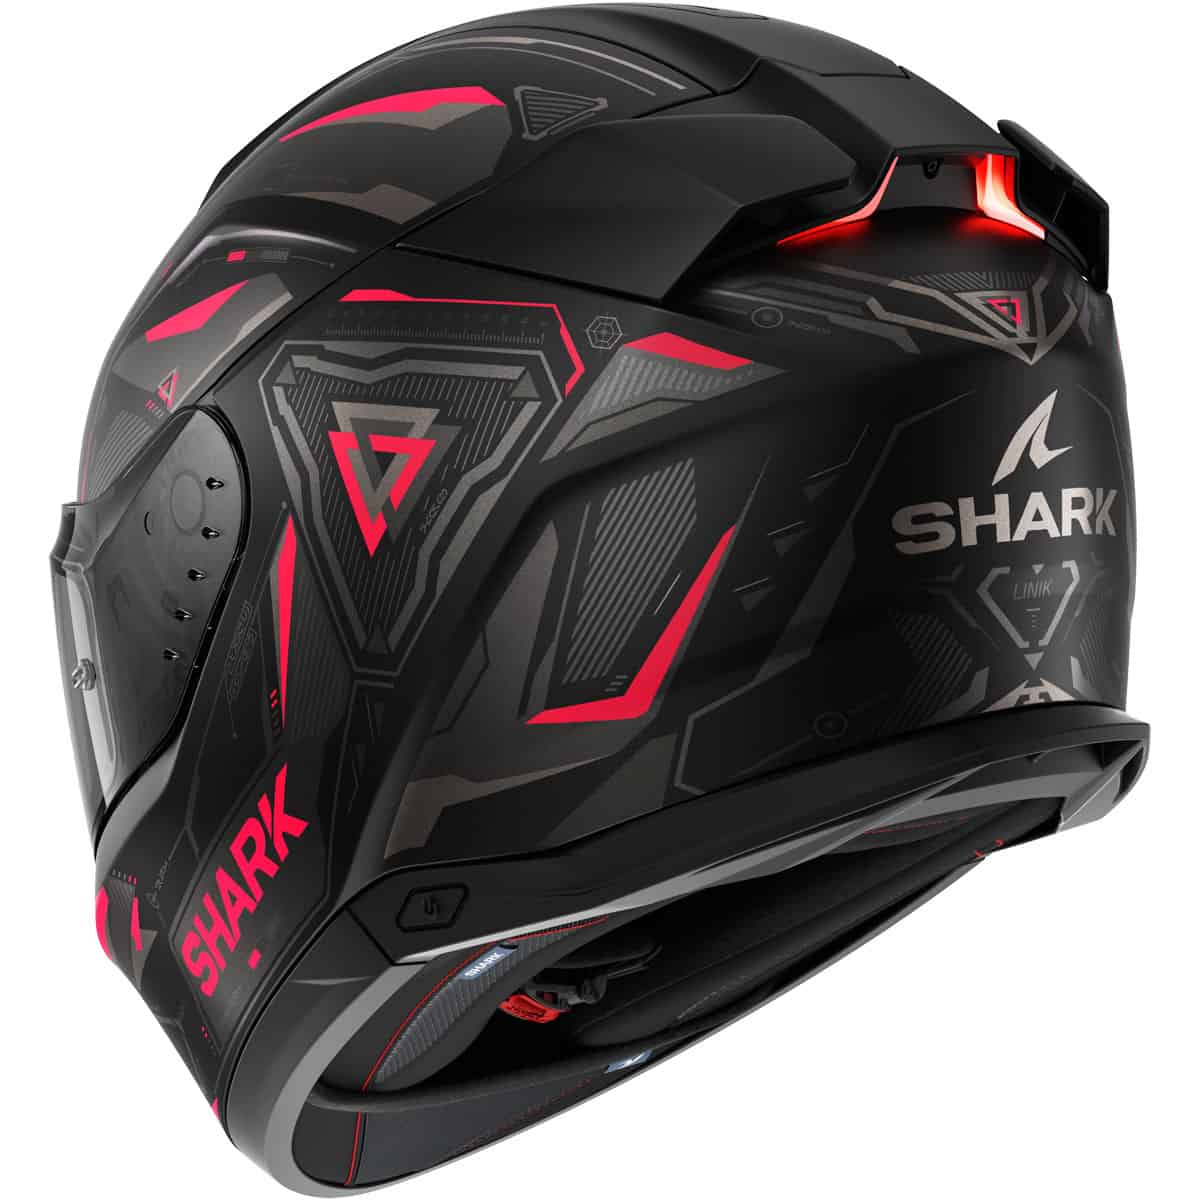 The Shark Skwal i3 helmet is the world's 1st helmet with integrated brake lights. This innovative full face helmet combines LED lights with an integrated accelerometer to trigger rear flashing brake lights on braking, without the need for cables or Bluetooth!